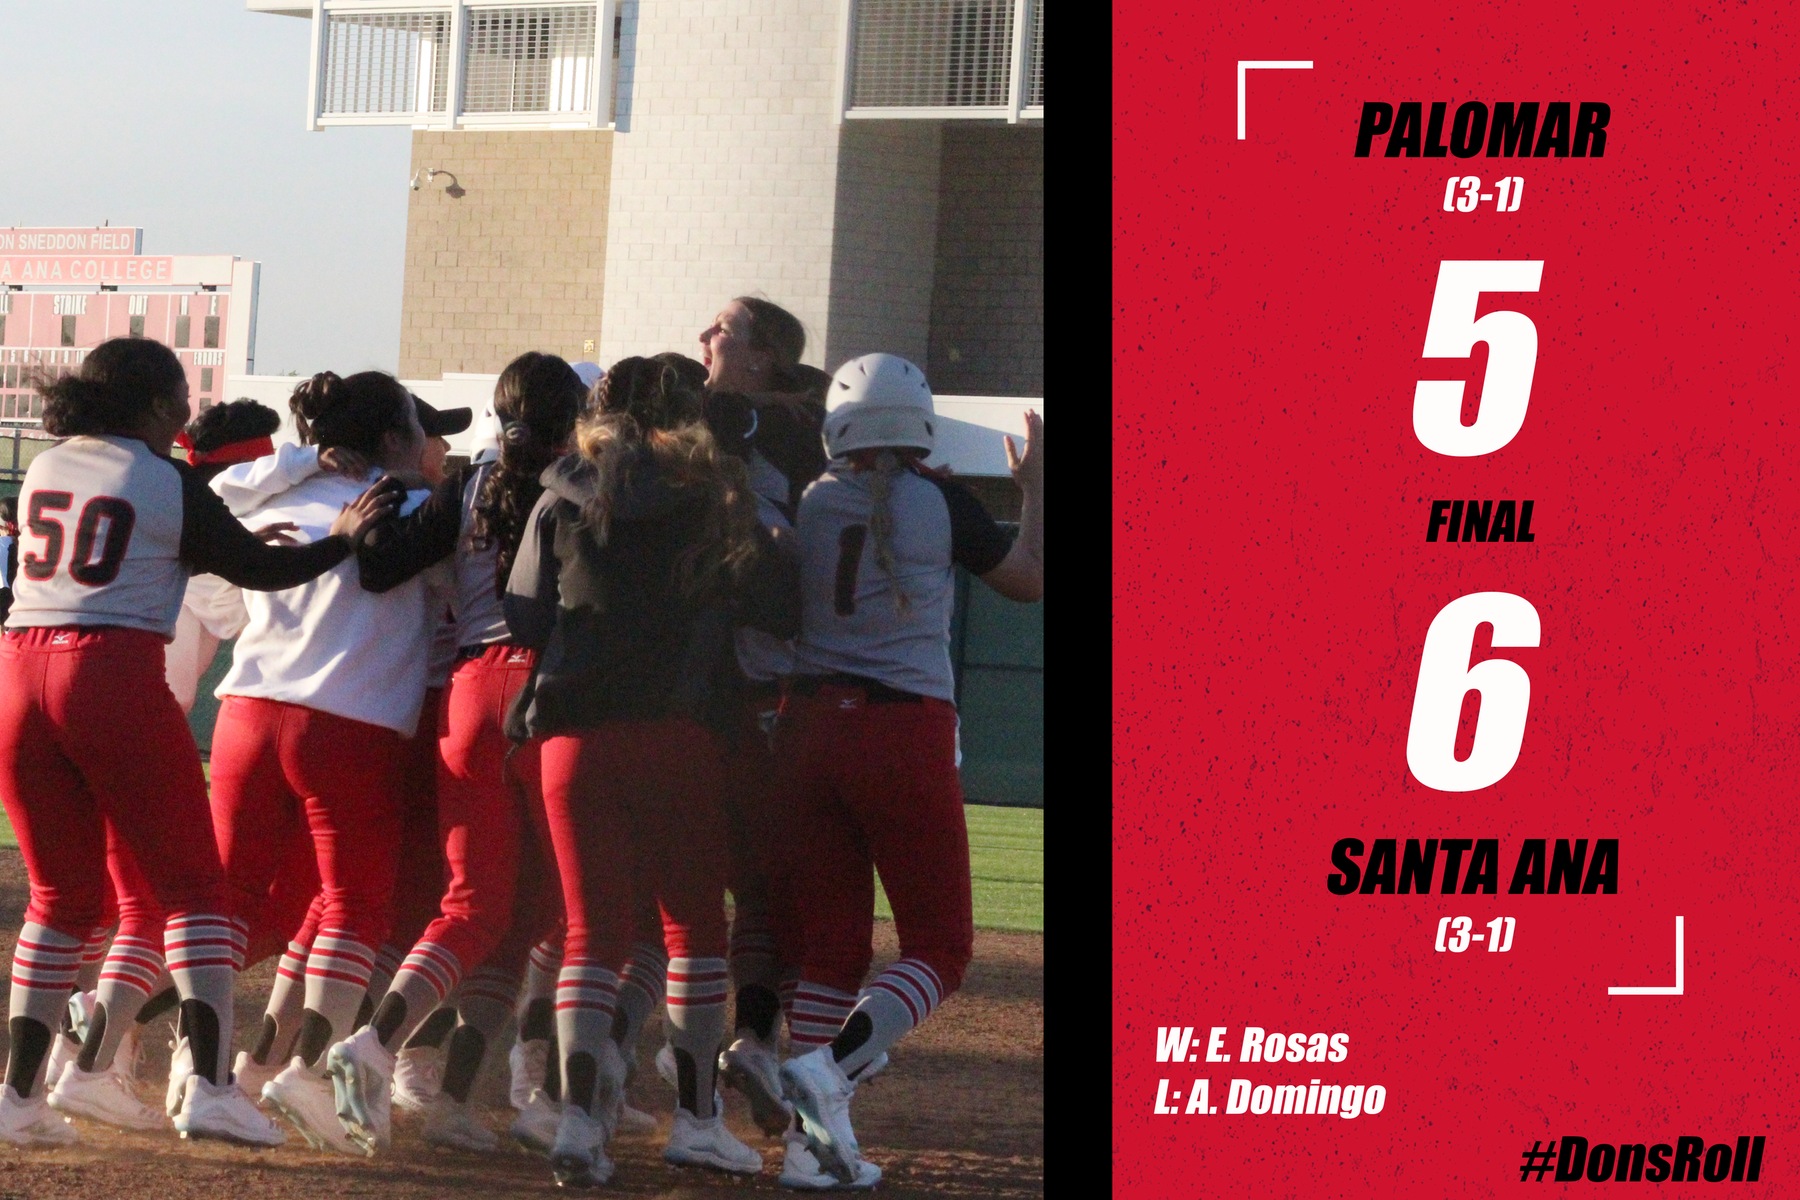 Holzberg Lifts Dons to 6-5 Win Over Palomar with Walk-Off Single